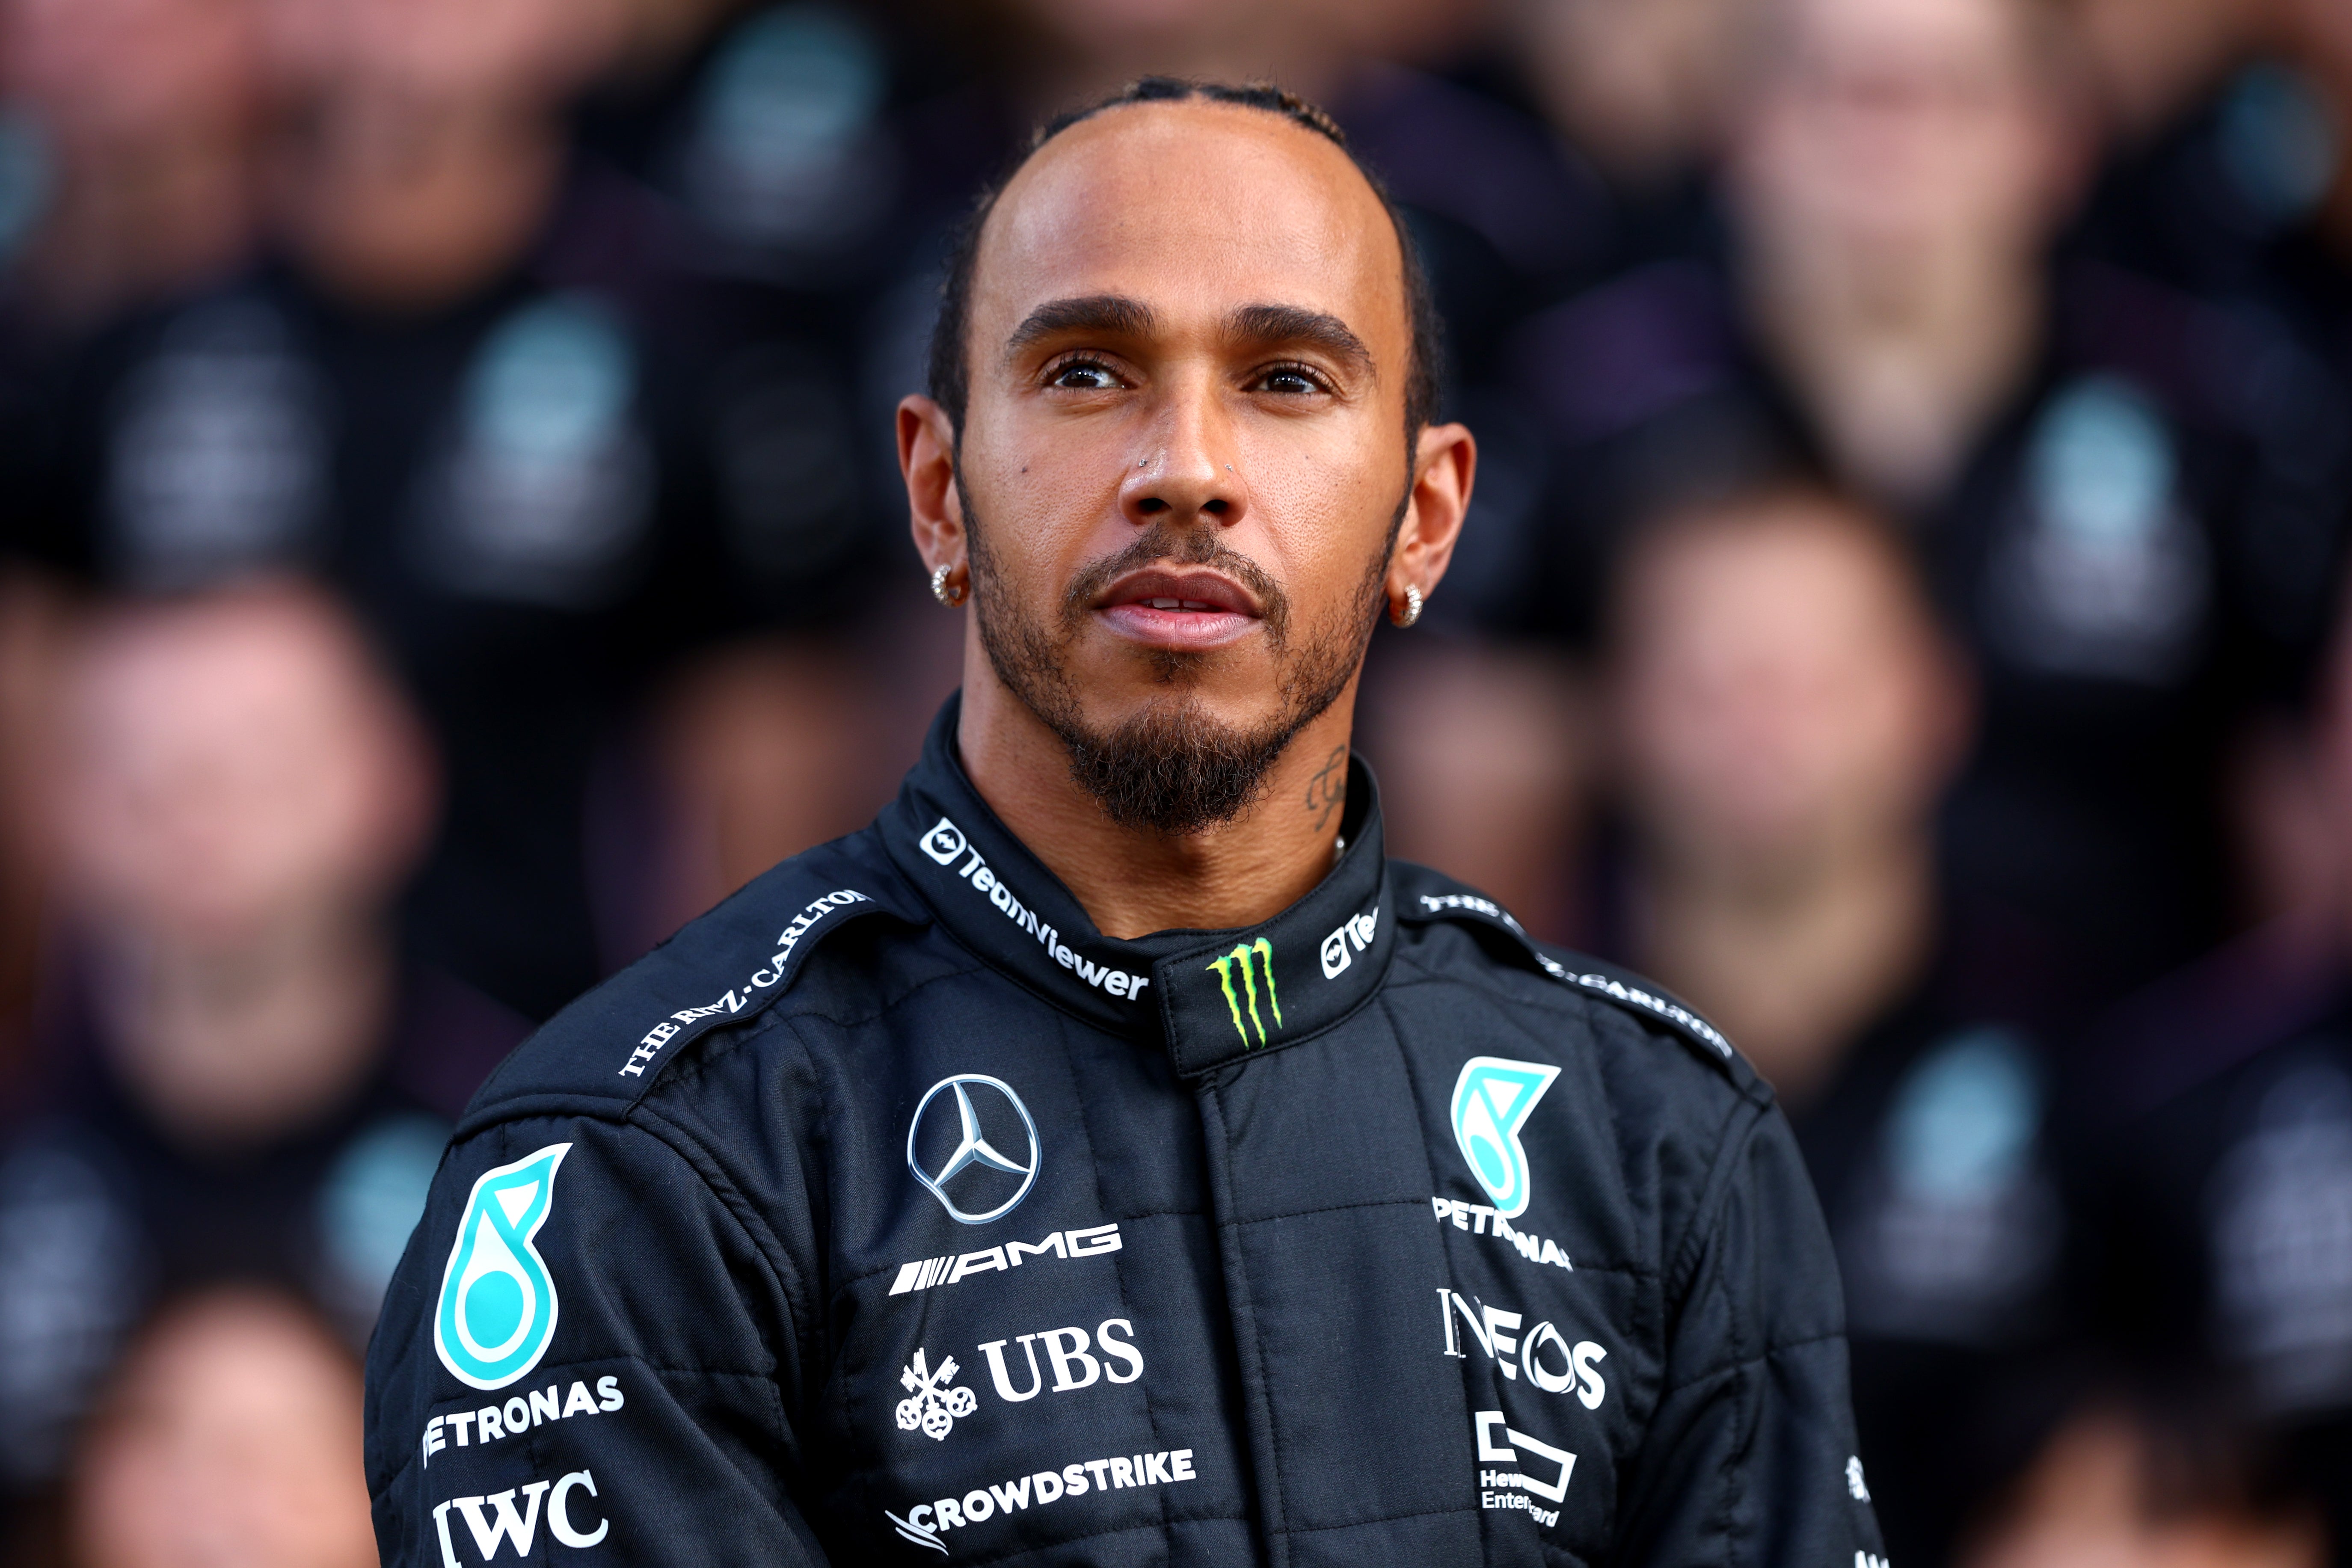 Lewis Hamilton could be about to make a shock move